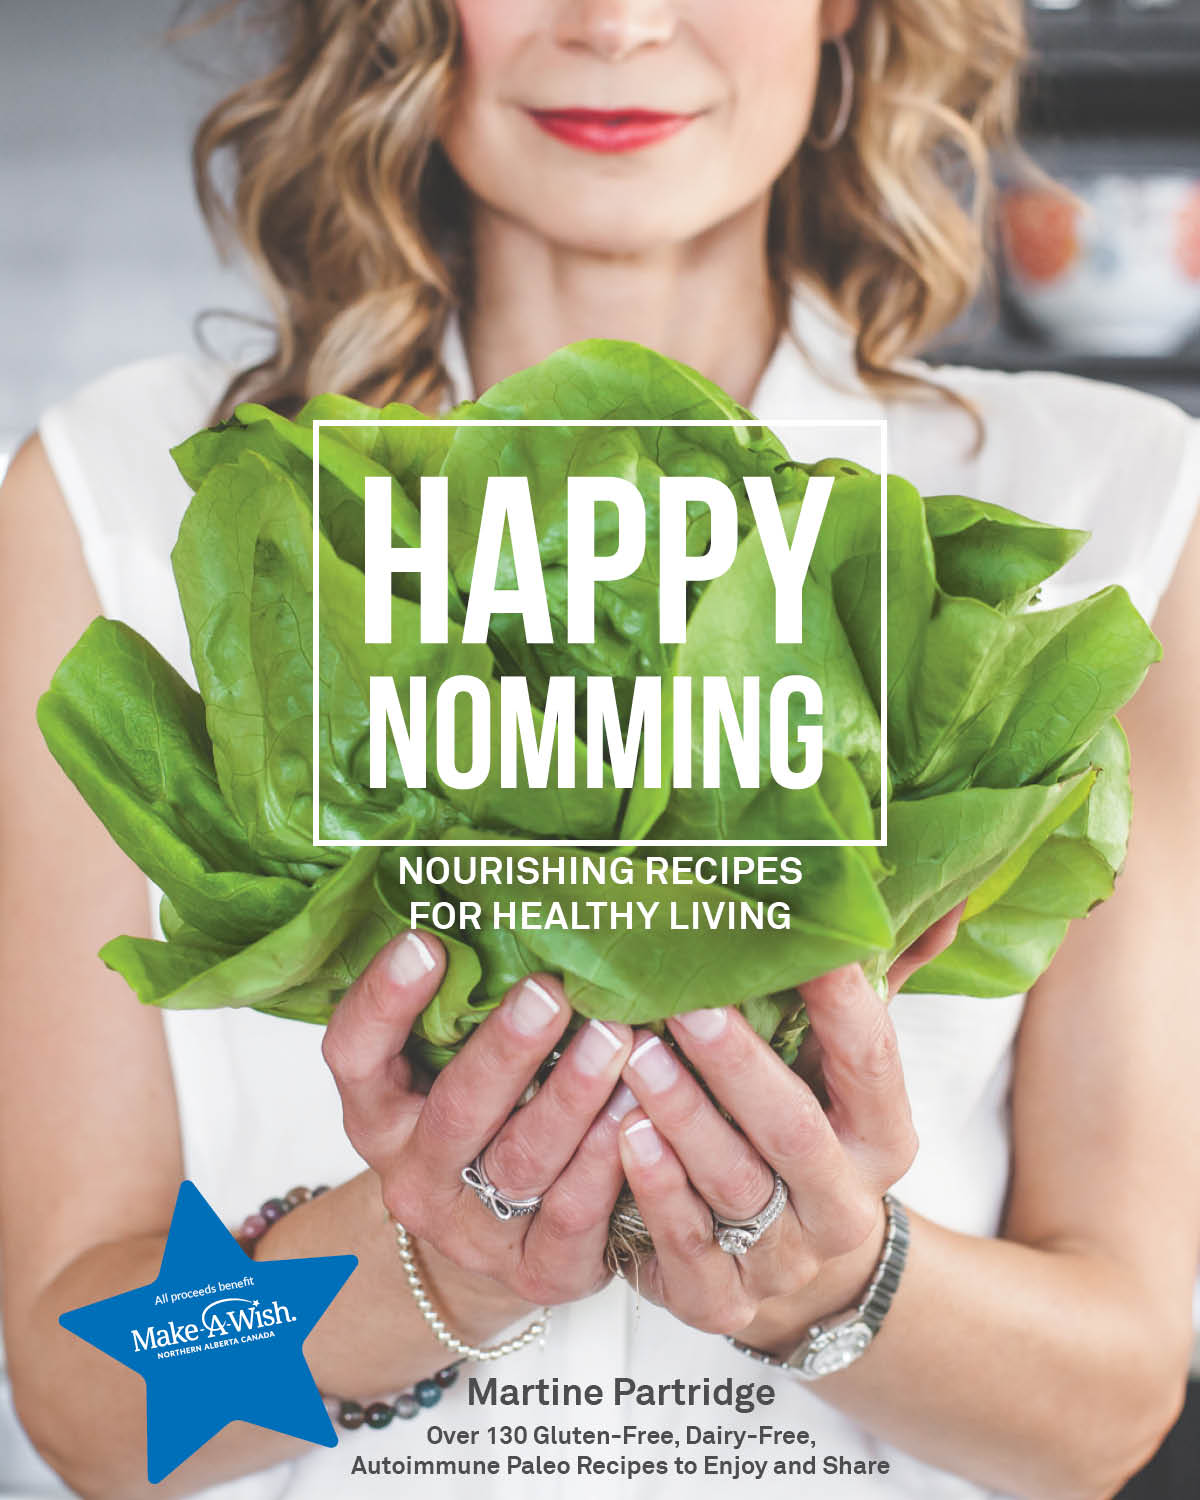 Happy Nomming: Nourishing Recipes for Healthy Living